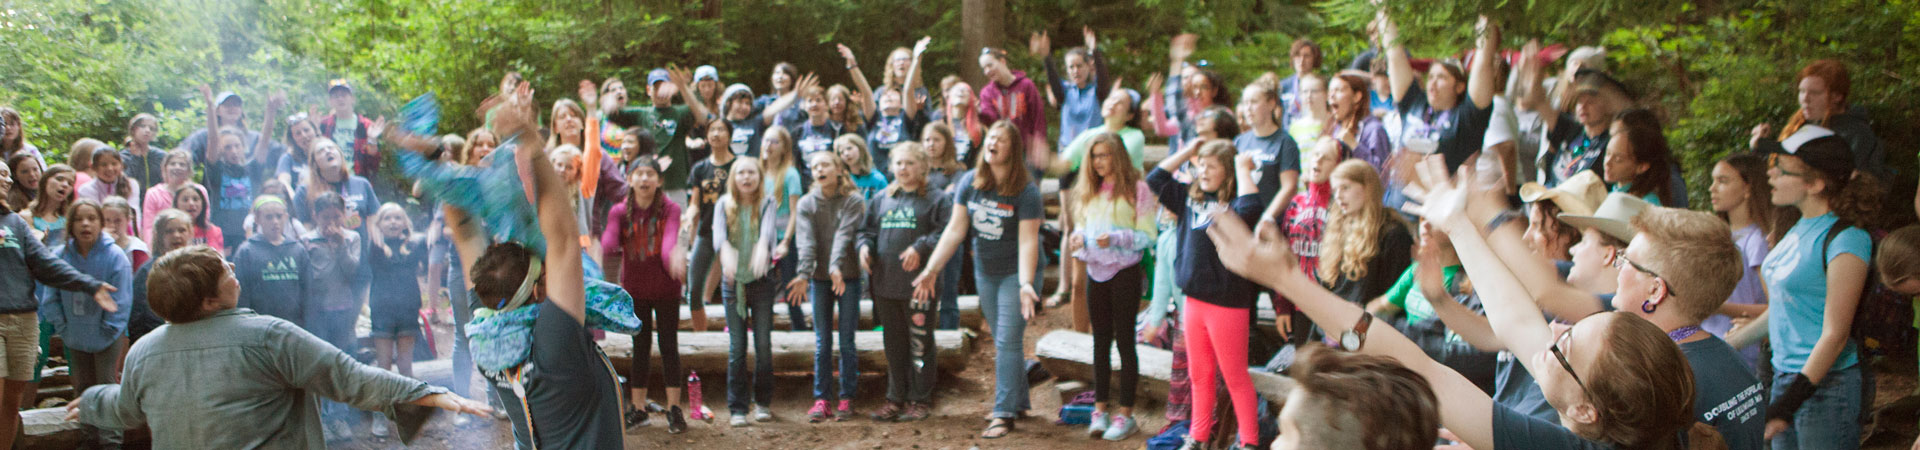  Adult Girl Scout volunteers and staff lead a large group of youth Girl Scout members in song around a campfire. The Girl Scouts are standing near wooden benches with their arms raised. There are trees behind them. 